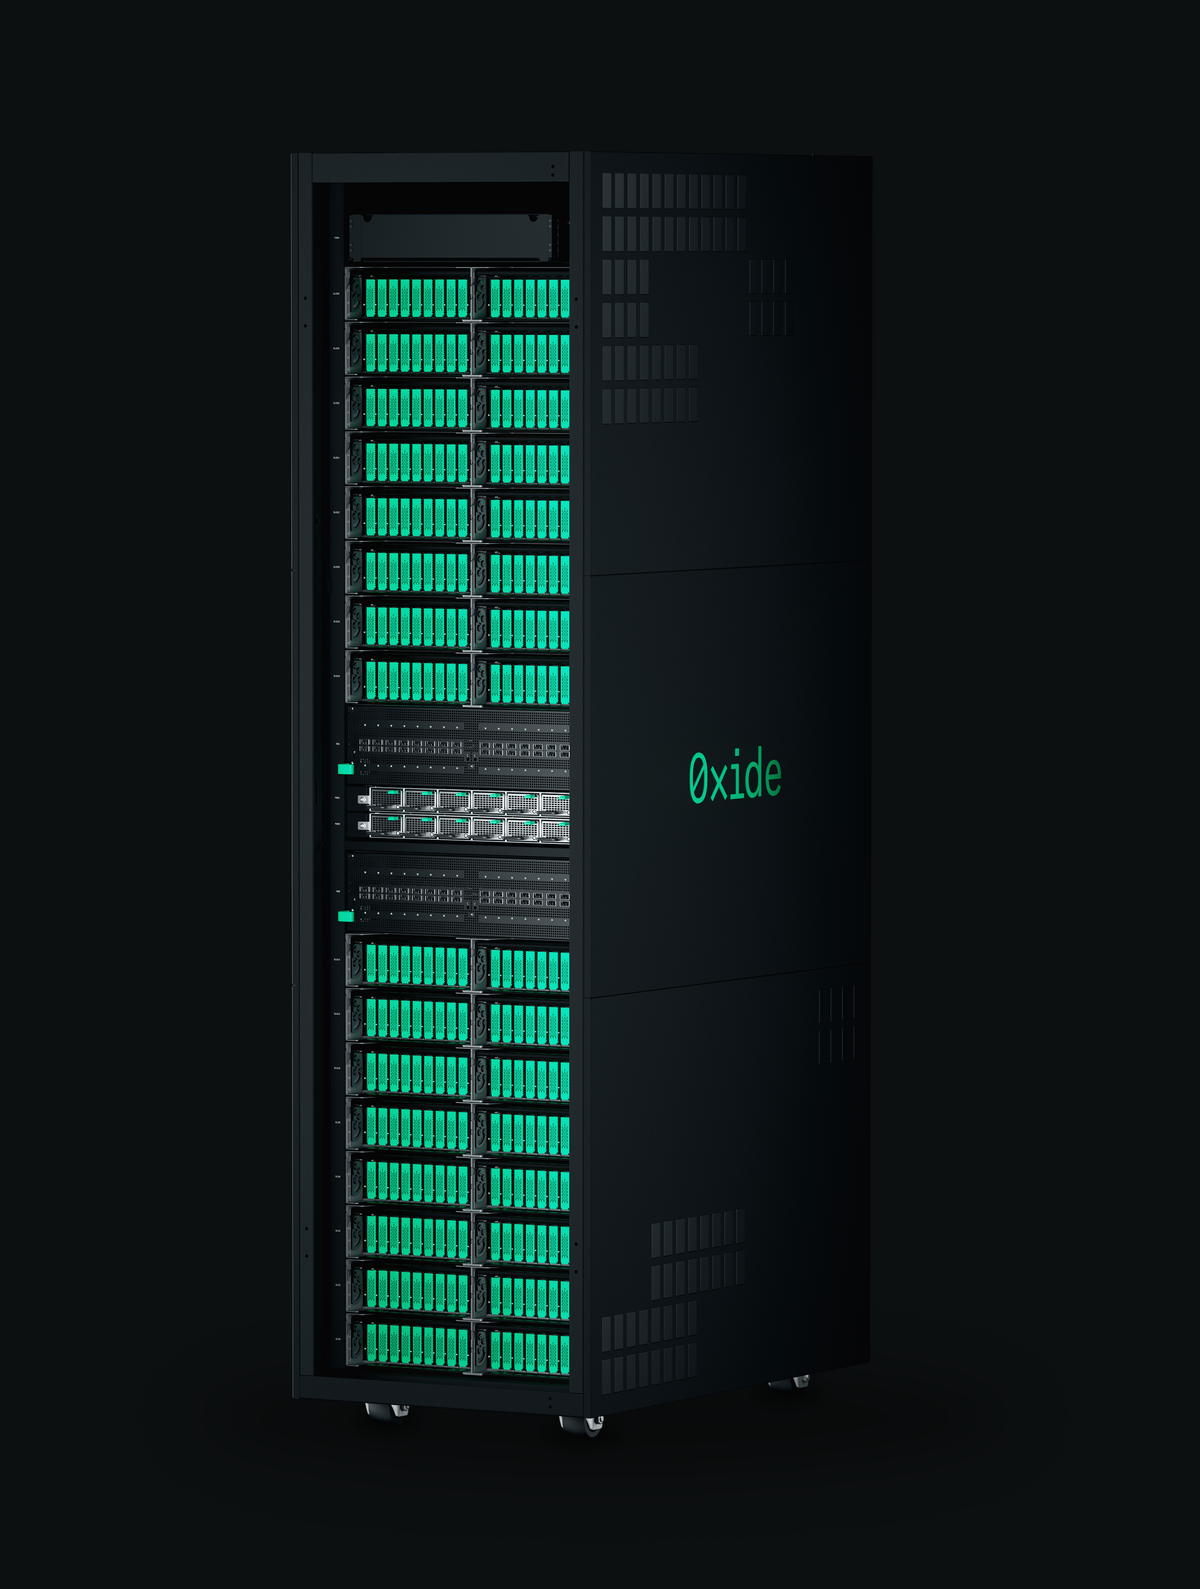 Oxide launches its cloud-like data center server